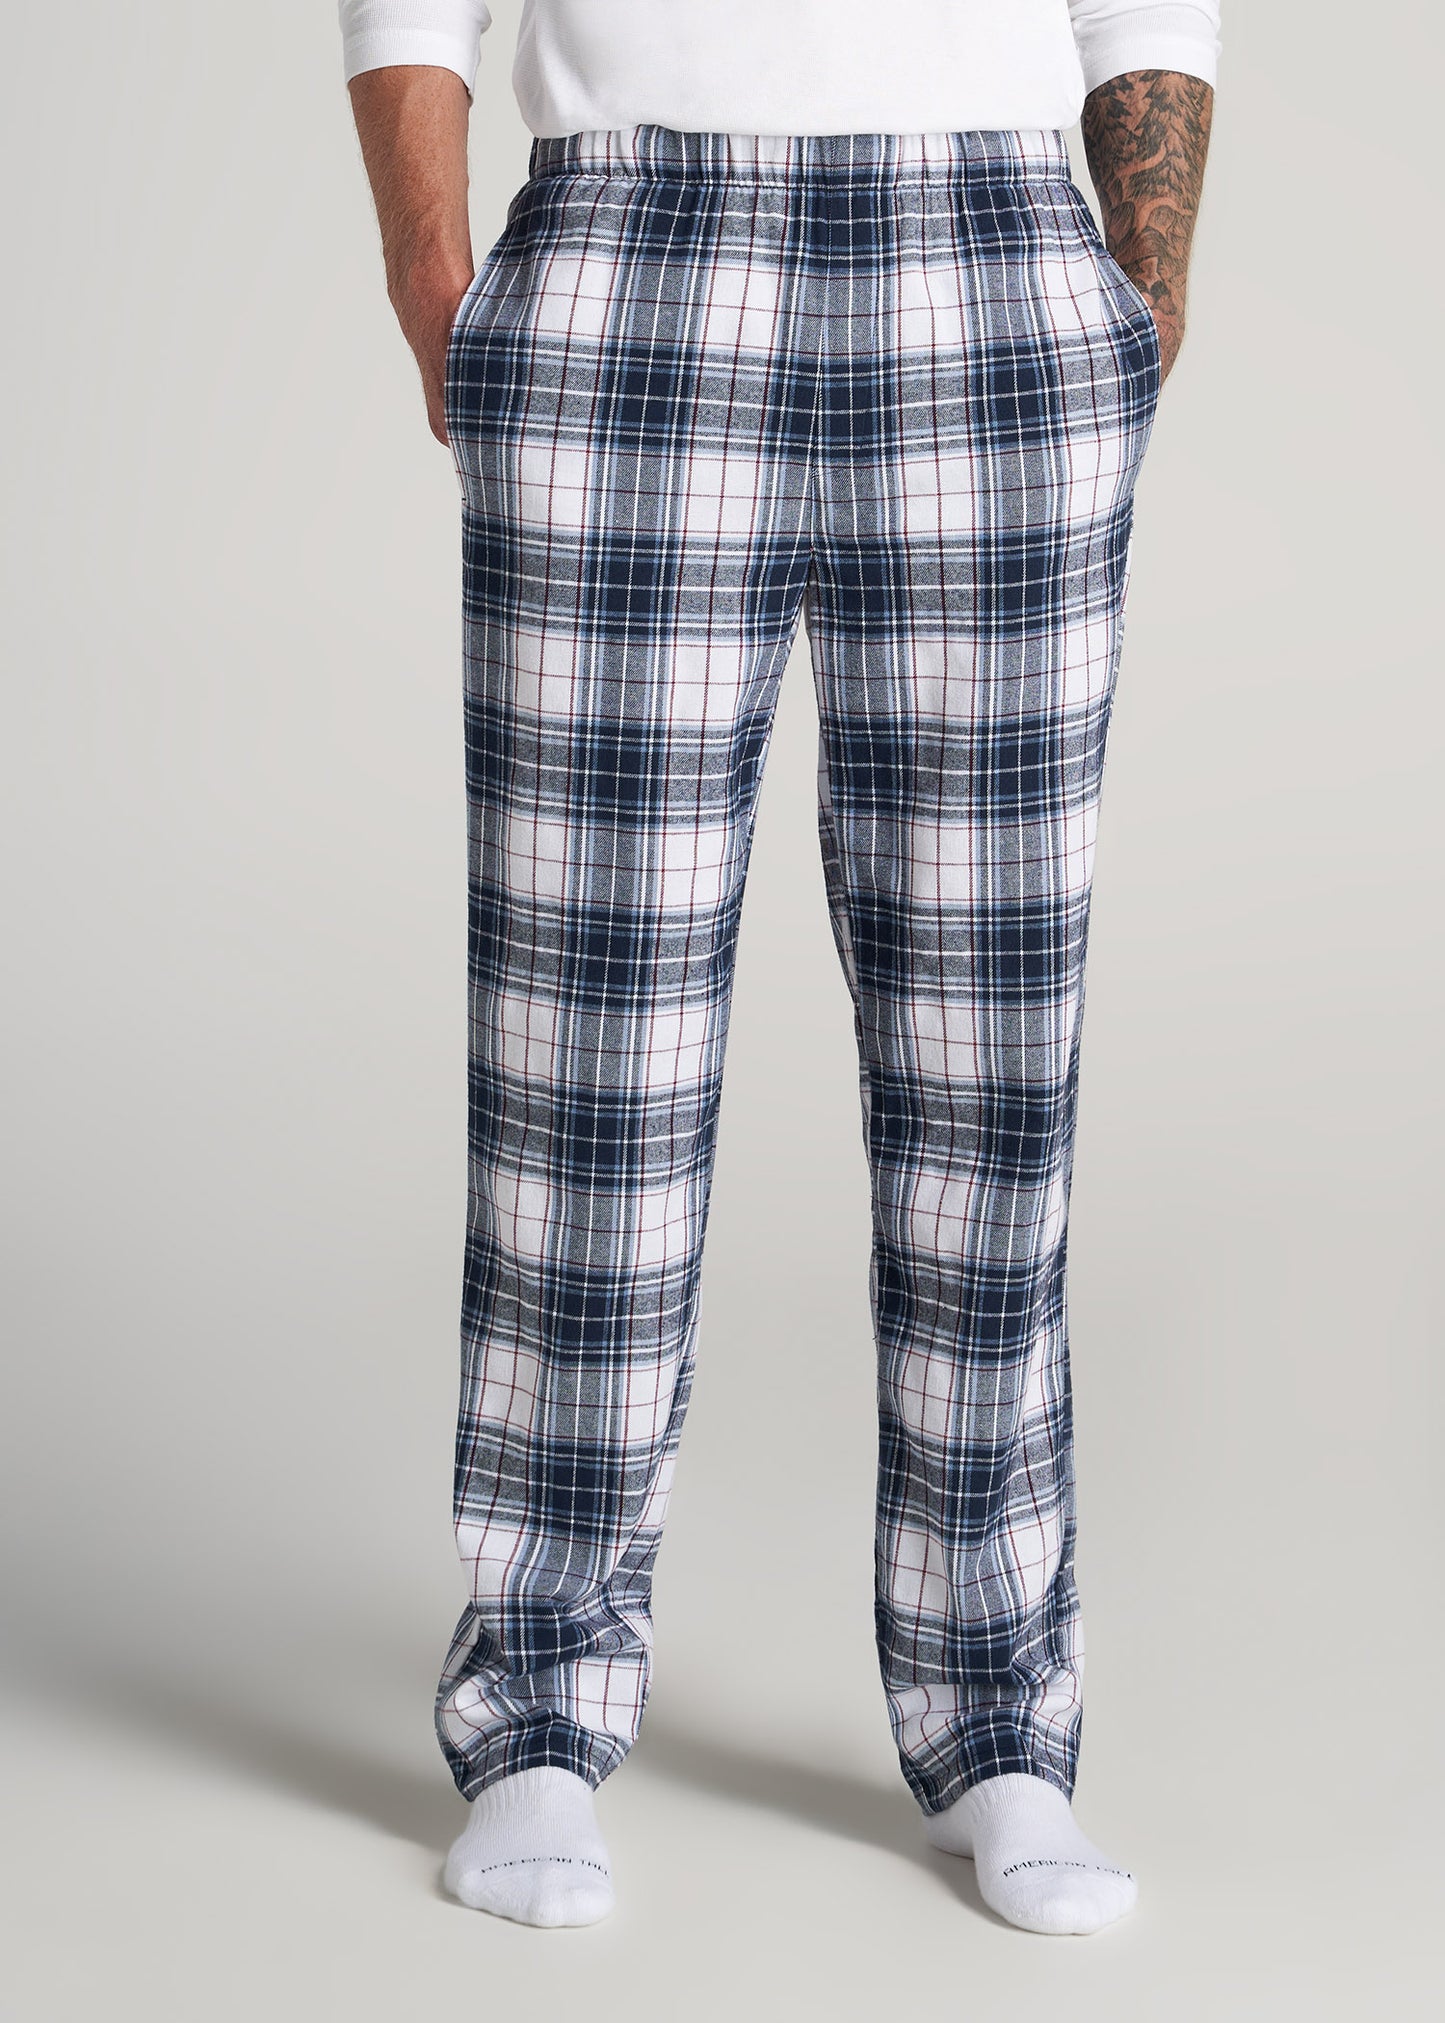 13 Types of Pajamas for Men and Women | Tommy John